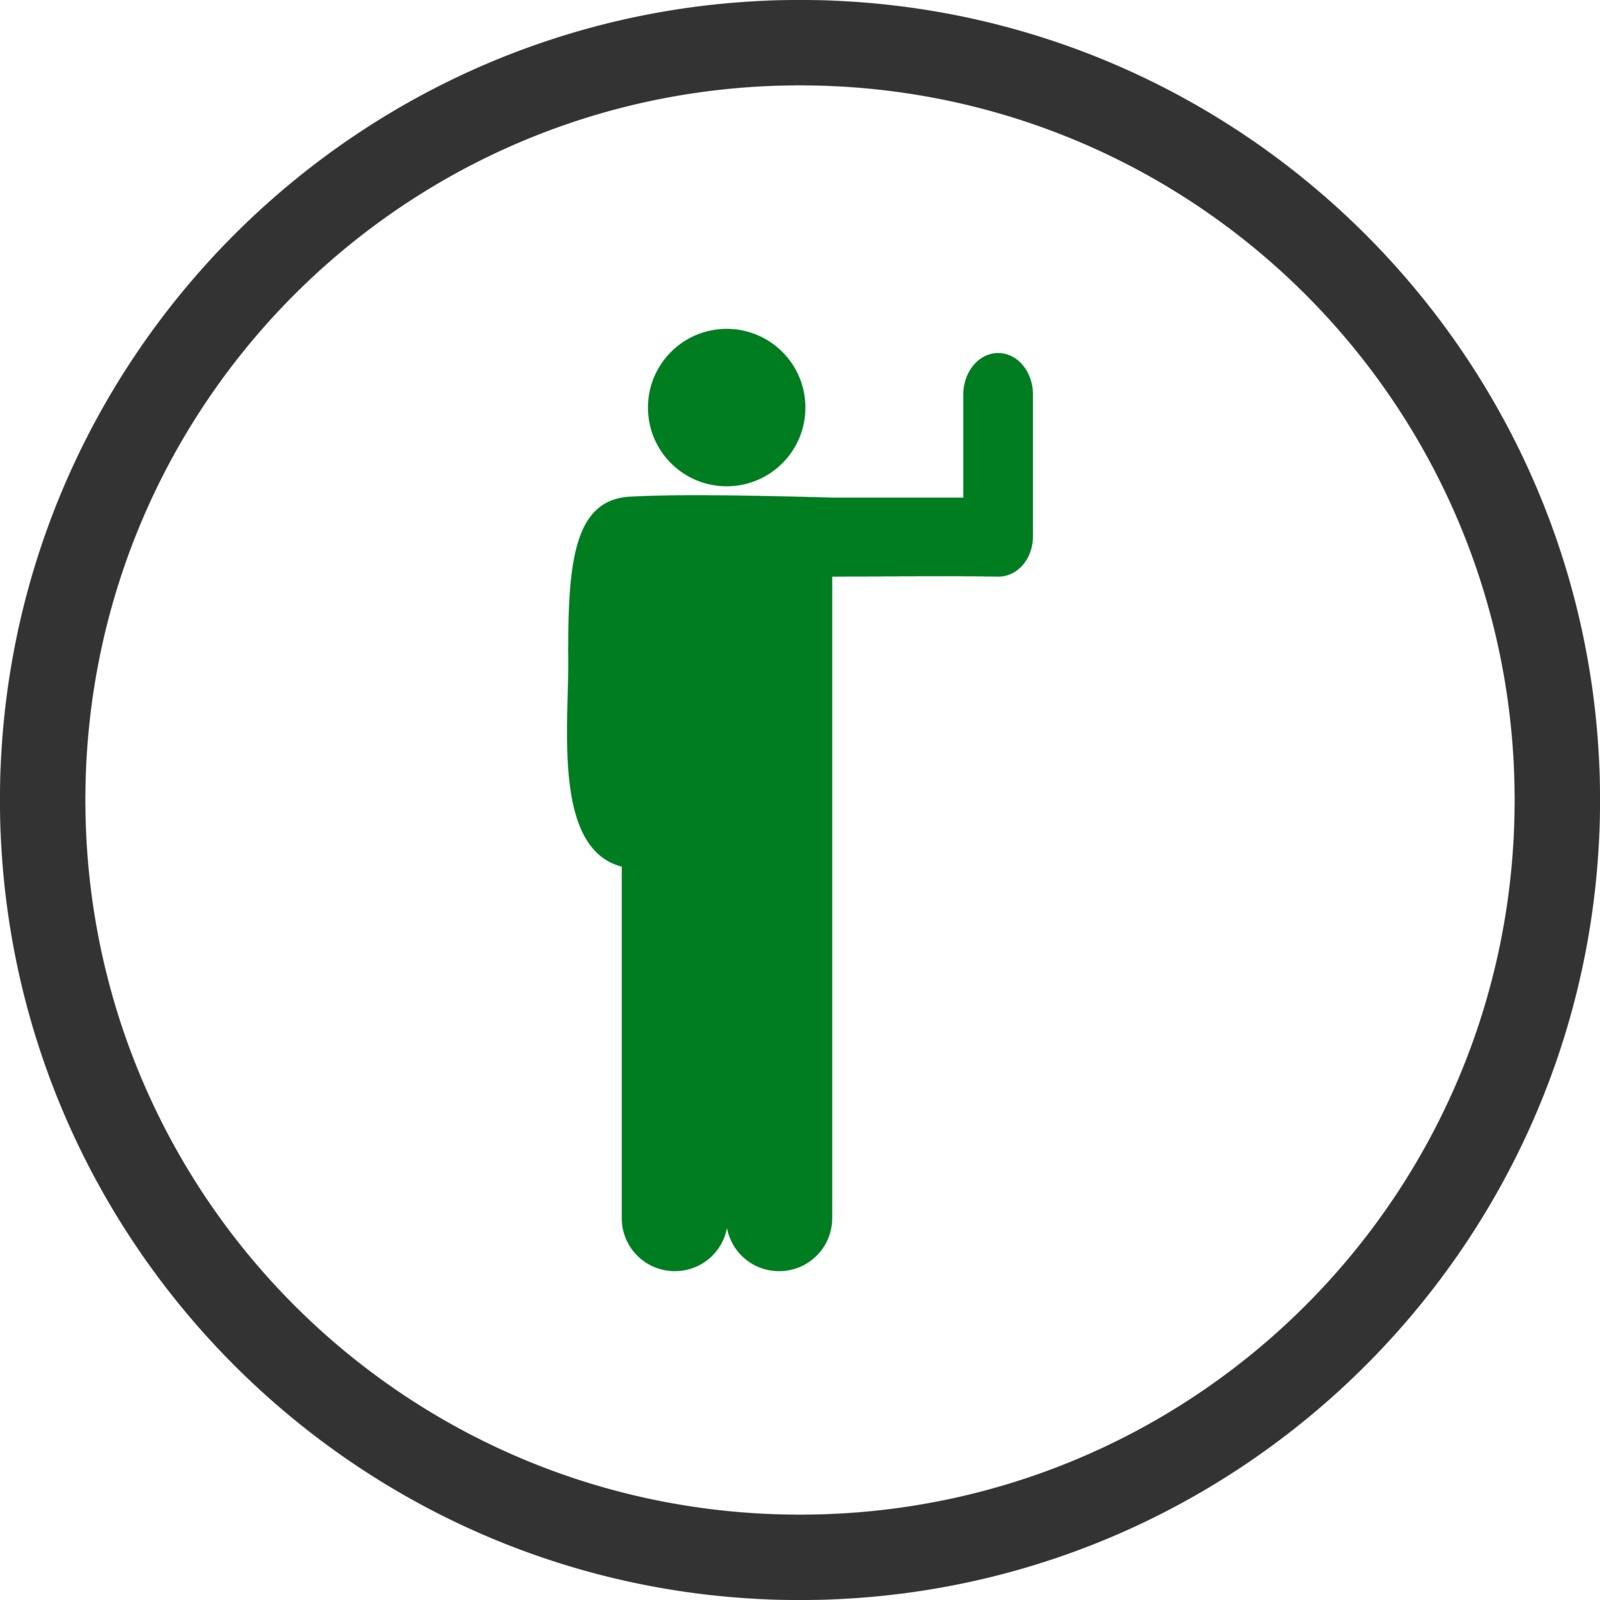 Vote vector icon. This rounded flat symbol is drawn with green and gray colors on a white background.